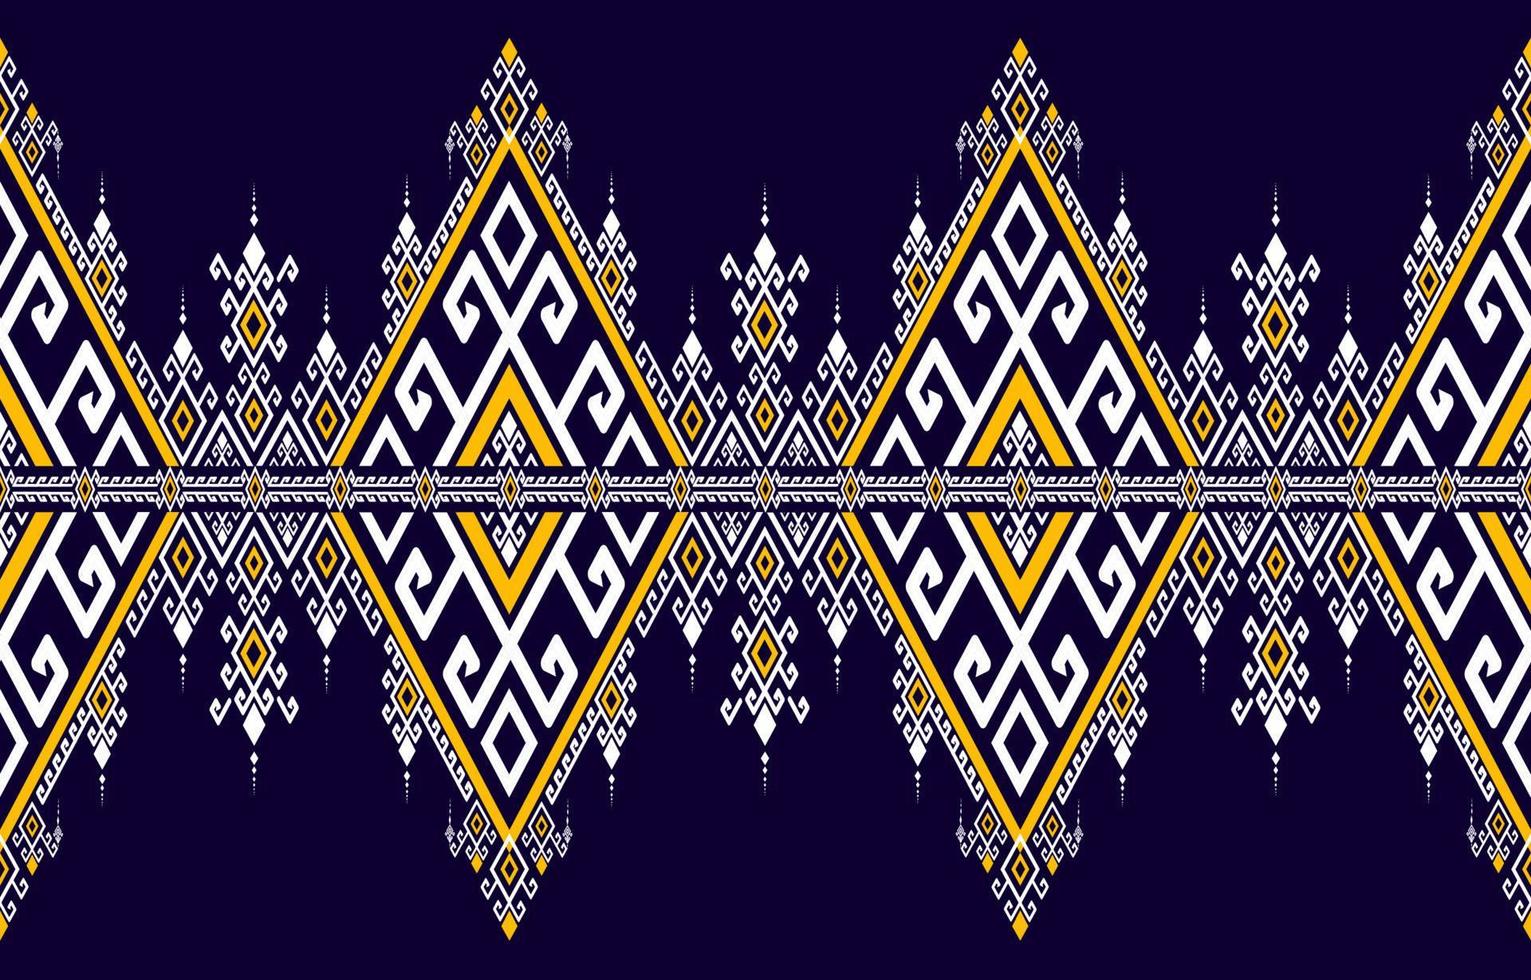 Geometric ethnic oriental seamless pattern traditional Design for background, carpet, wallpaper, clothing, wrapping, Batik, home decoration, fabric pattern, embroidery style. Vector illustration.